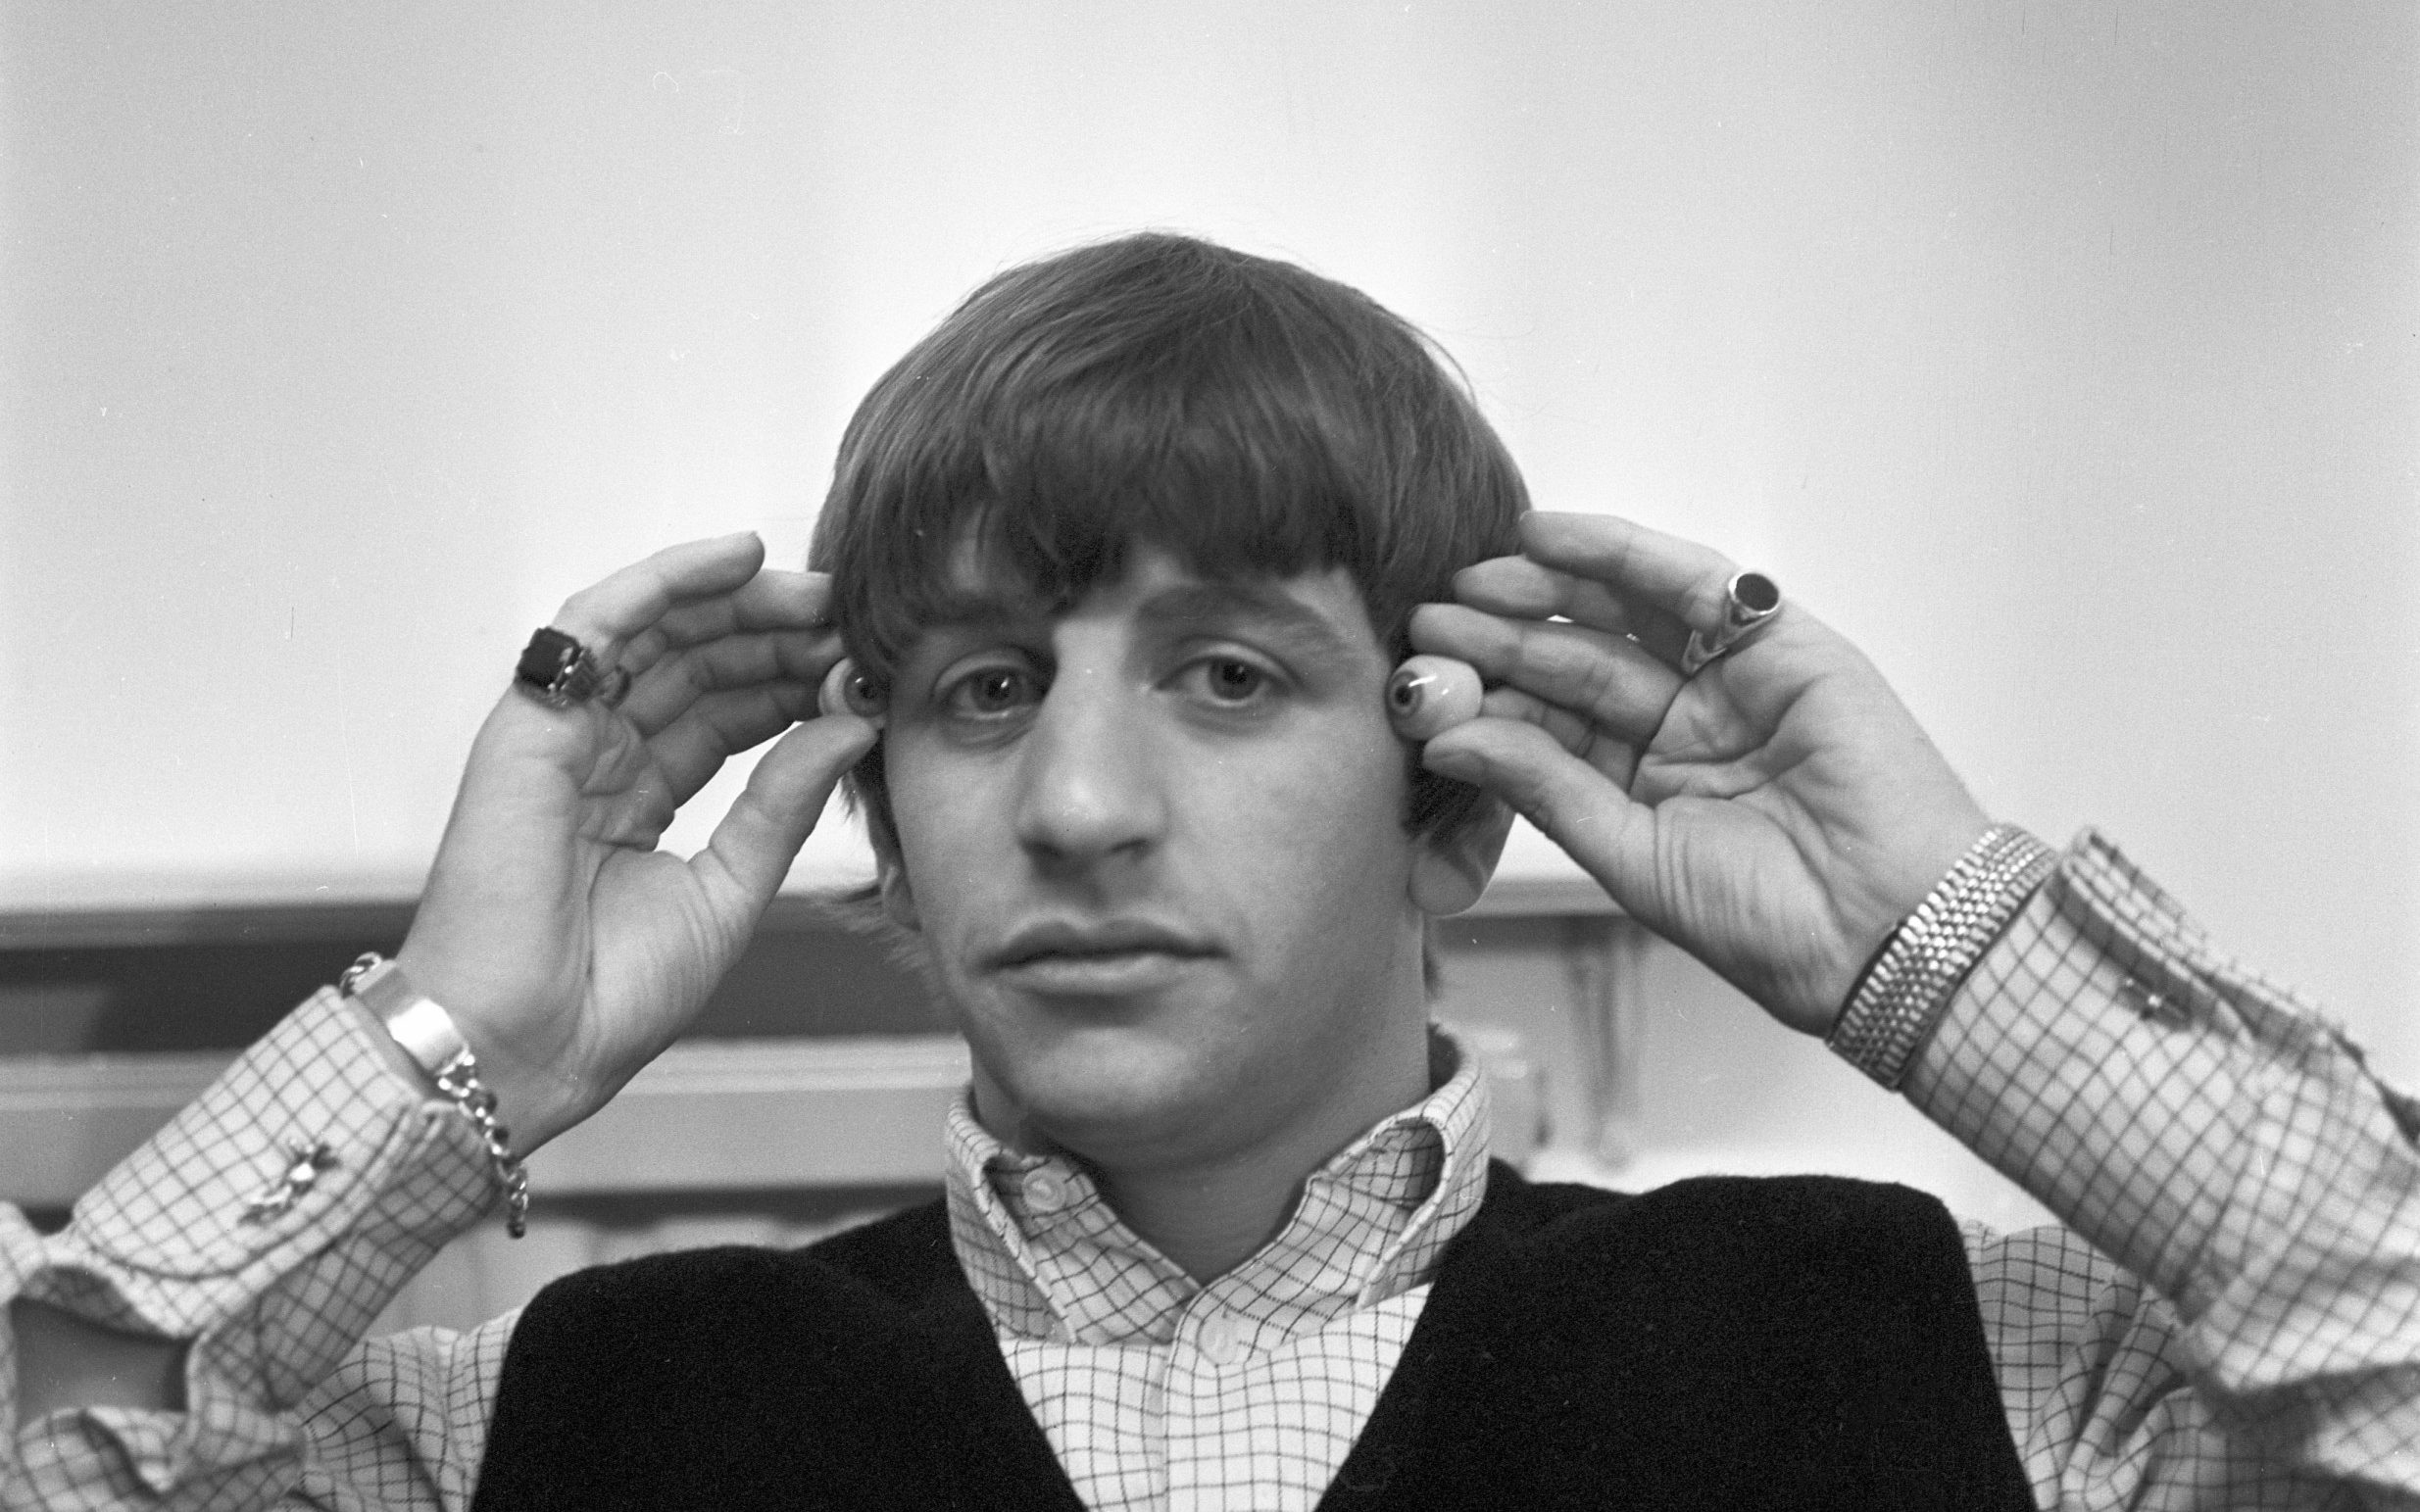 call me perverse, but to me ringo was the greatest beatle